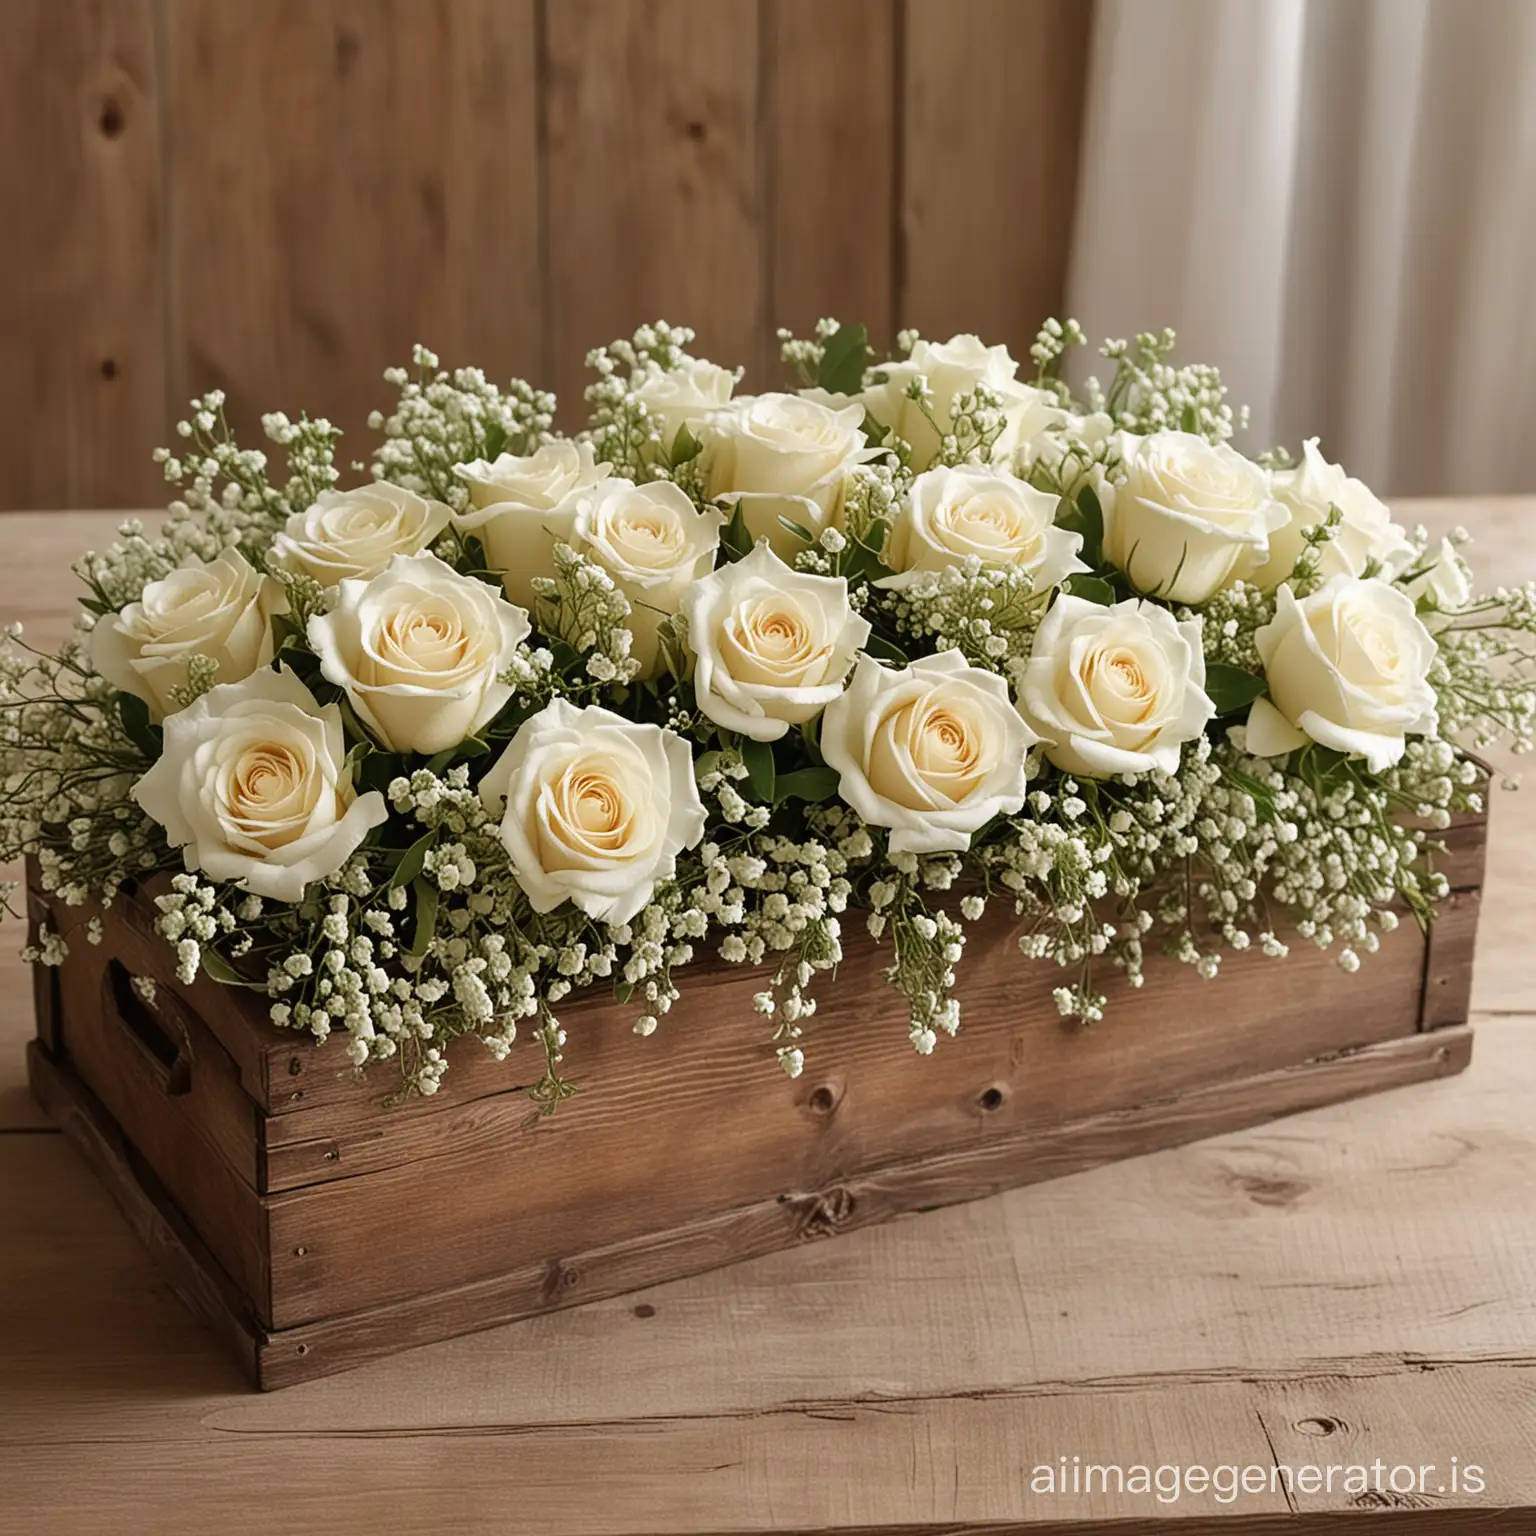 Rustic-Vintage-Wooden-Box-Floral-Centerpiece-with-Ivory-Roses-and-Babys-Breath